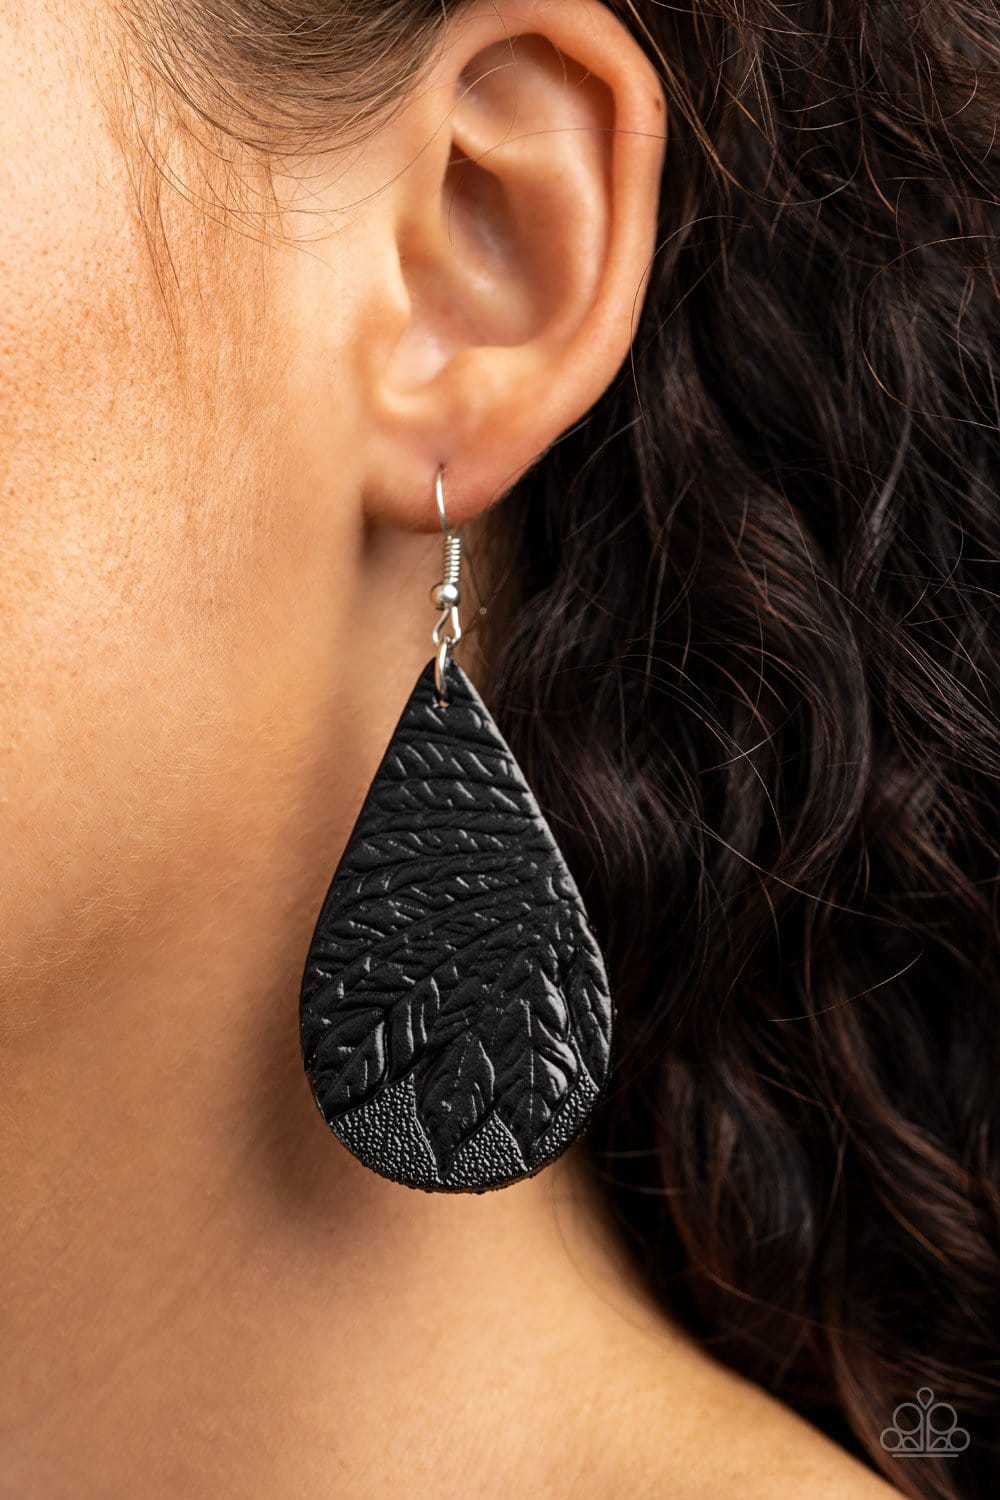 Paparazzi: Everyone Remain PALM! - Black Leather Teardrop Earrings - Jewels N’ Thingz Boutique